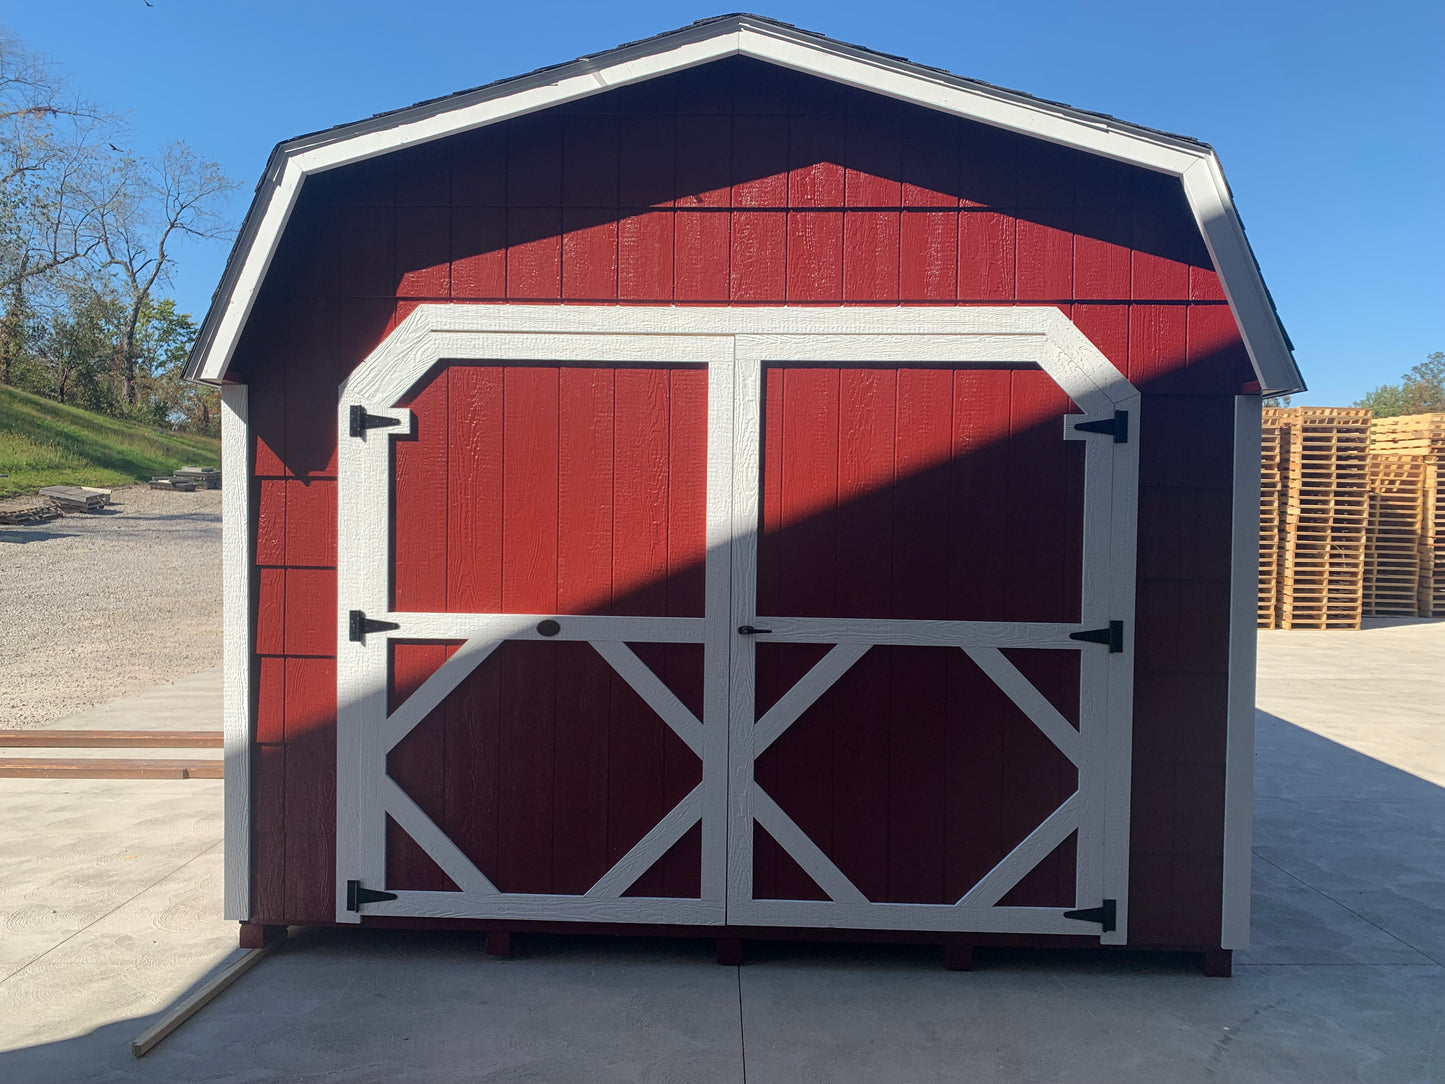 12x24 Lofted Garage/Barn with 6' sidewalls and 18" Lap Siding - Paint